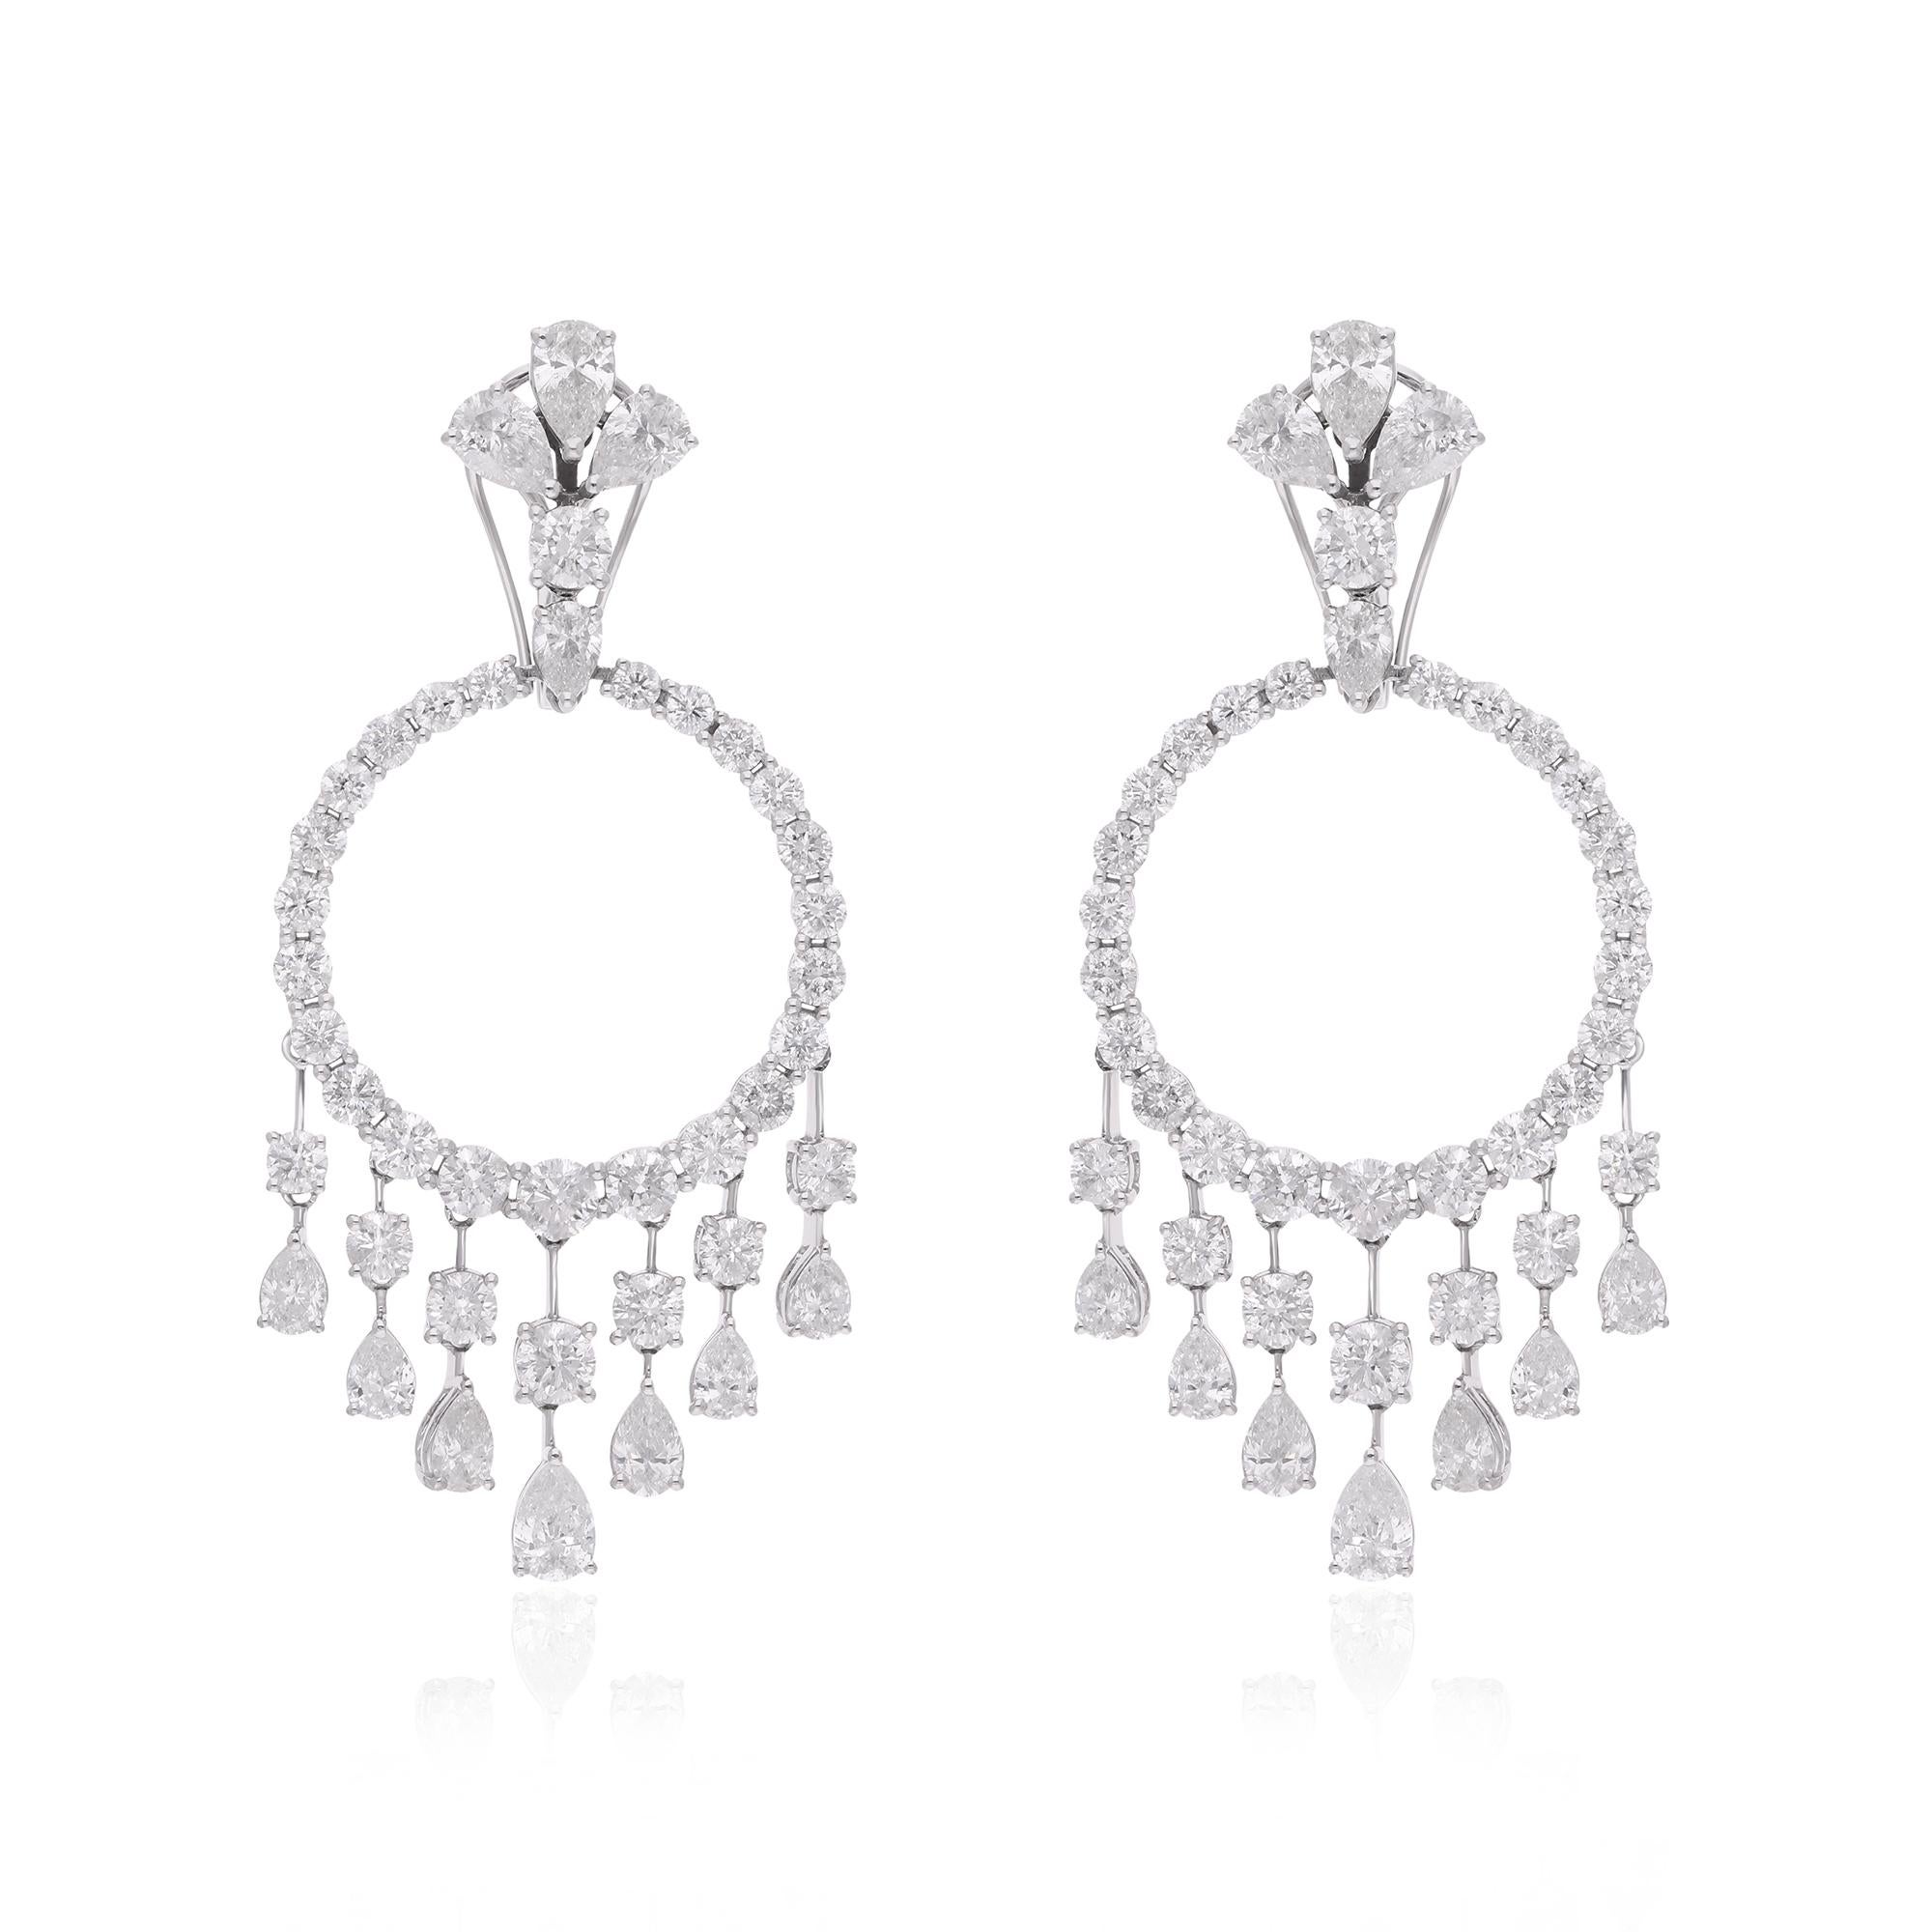 The design of these chandelier earrings is nothing short of mesmerizing. Cascading from the top, a delicate array of diamonds descends in a graceful, chandelier-inspired pattern. Each diamond is meticulously set in lustrous 14 Karat White Gold,